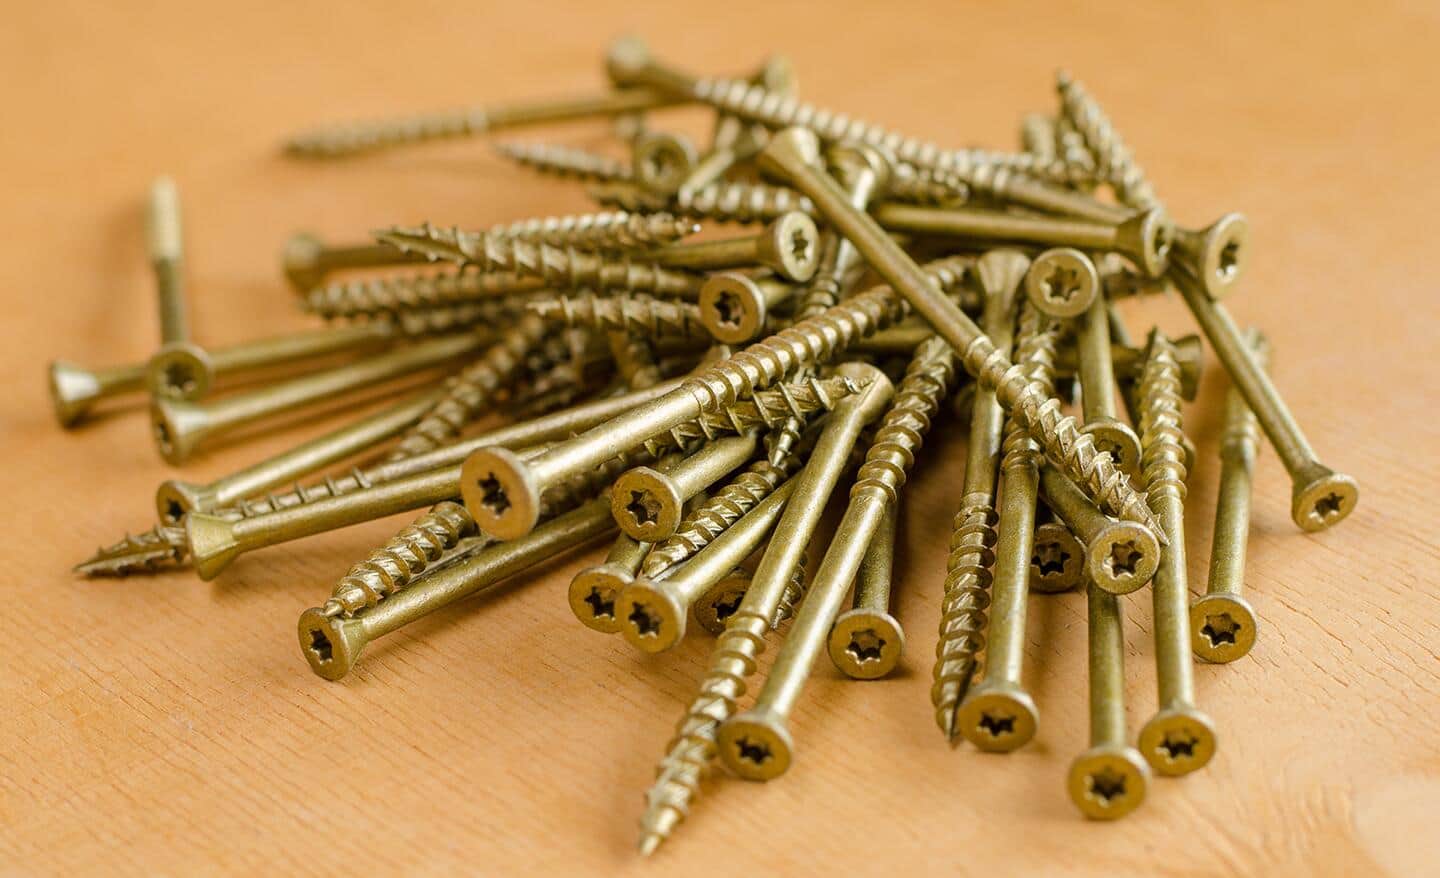 A pile of coarse drywall screws sitting on a table.